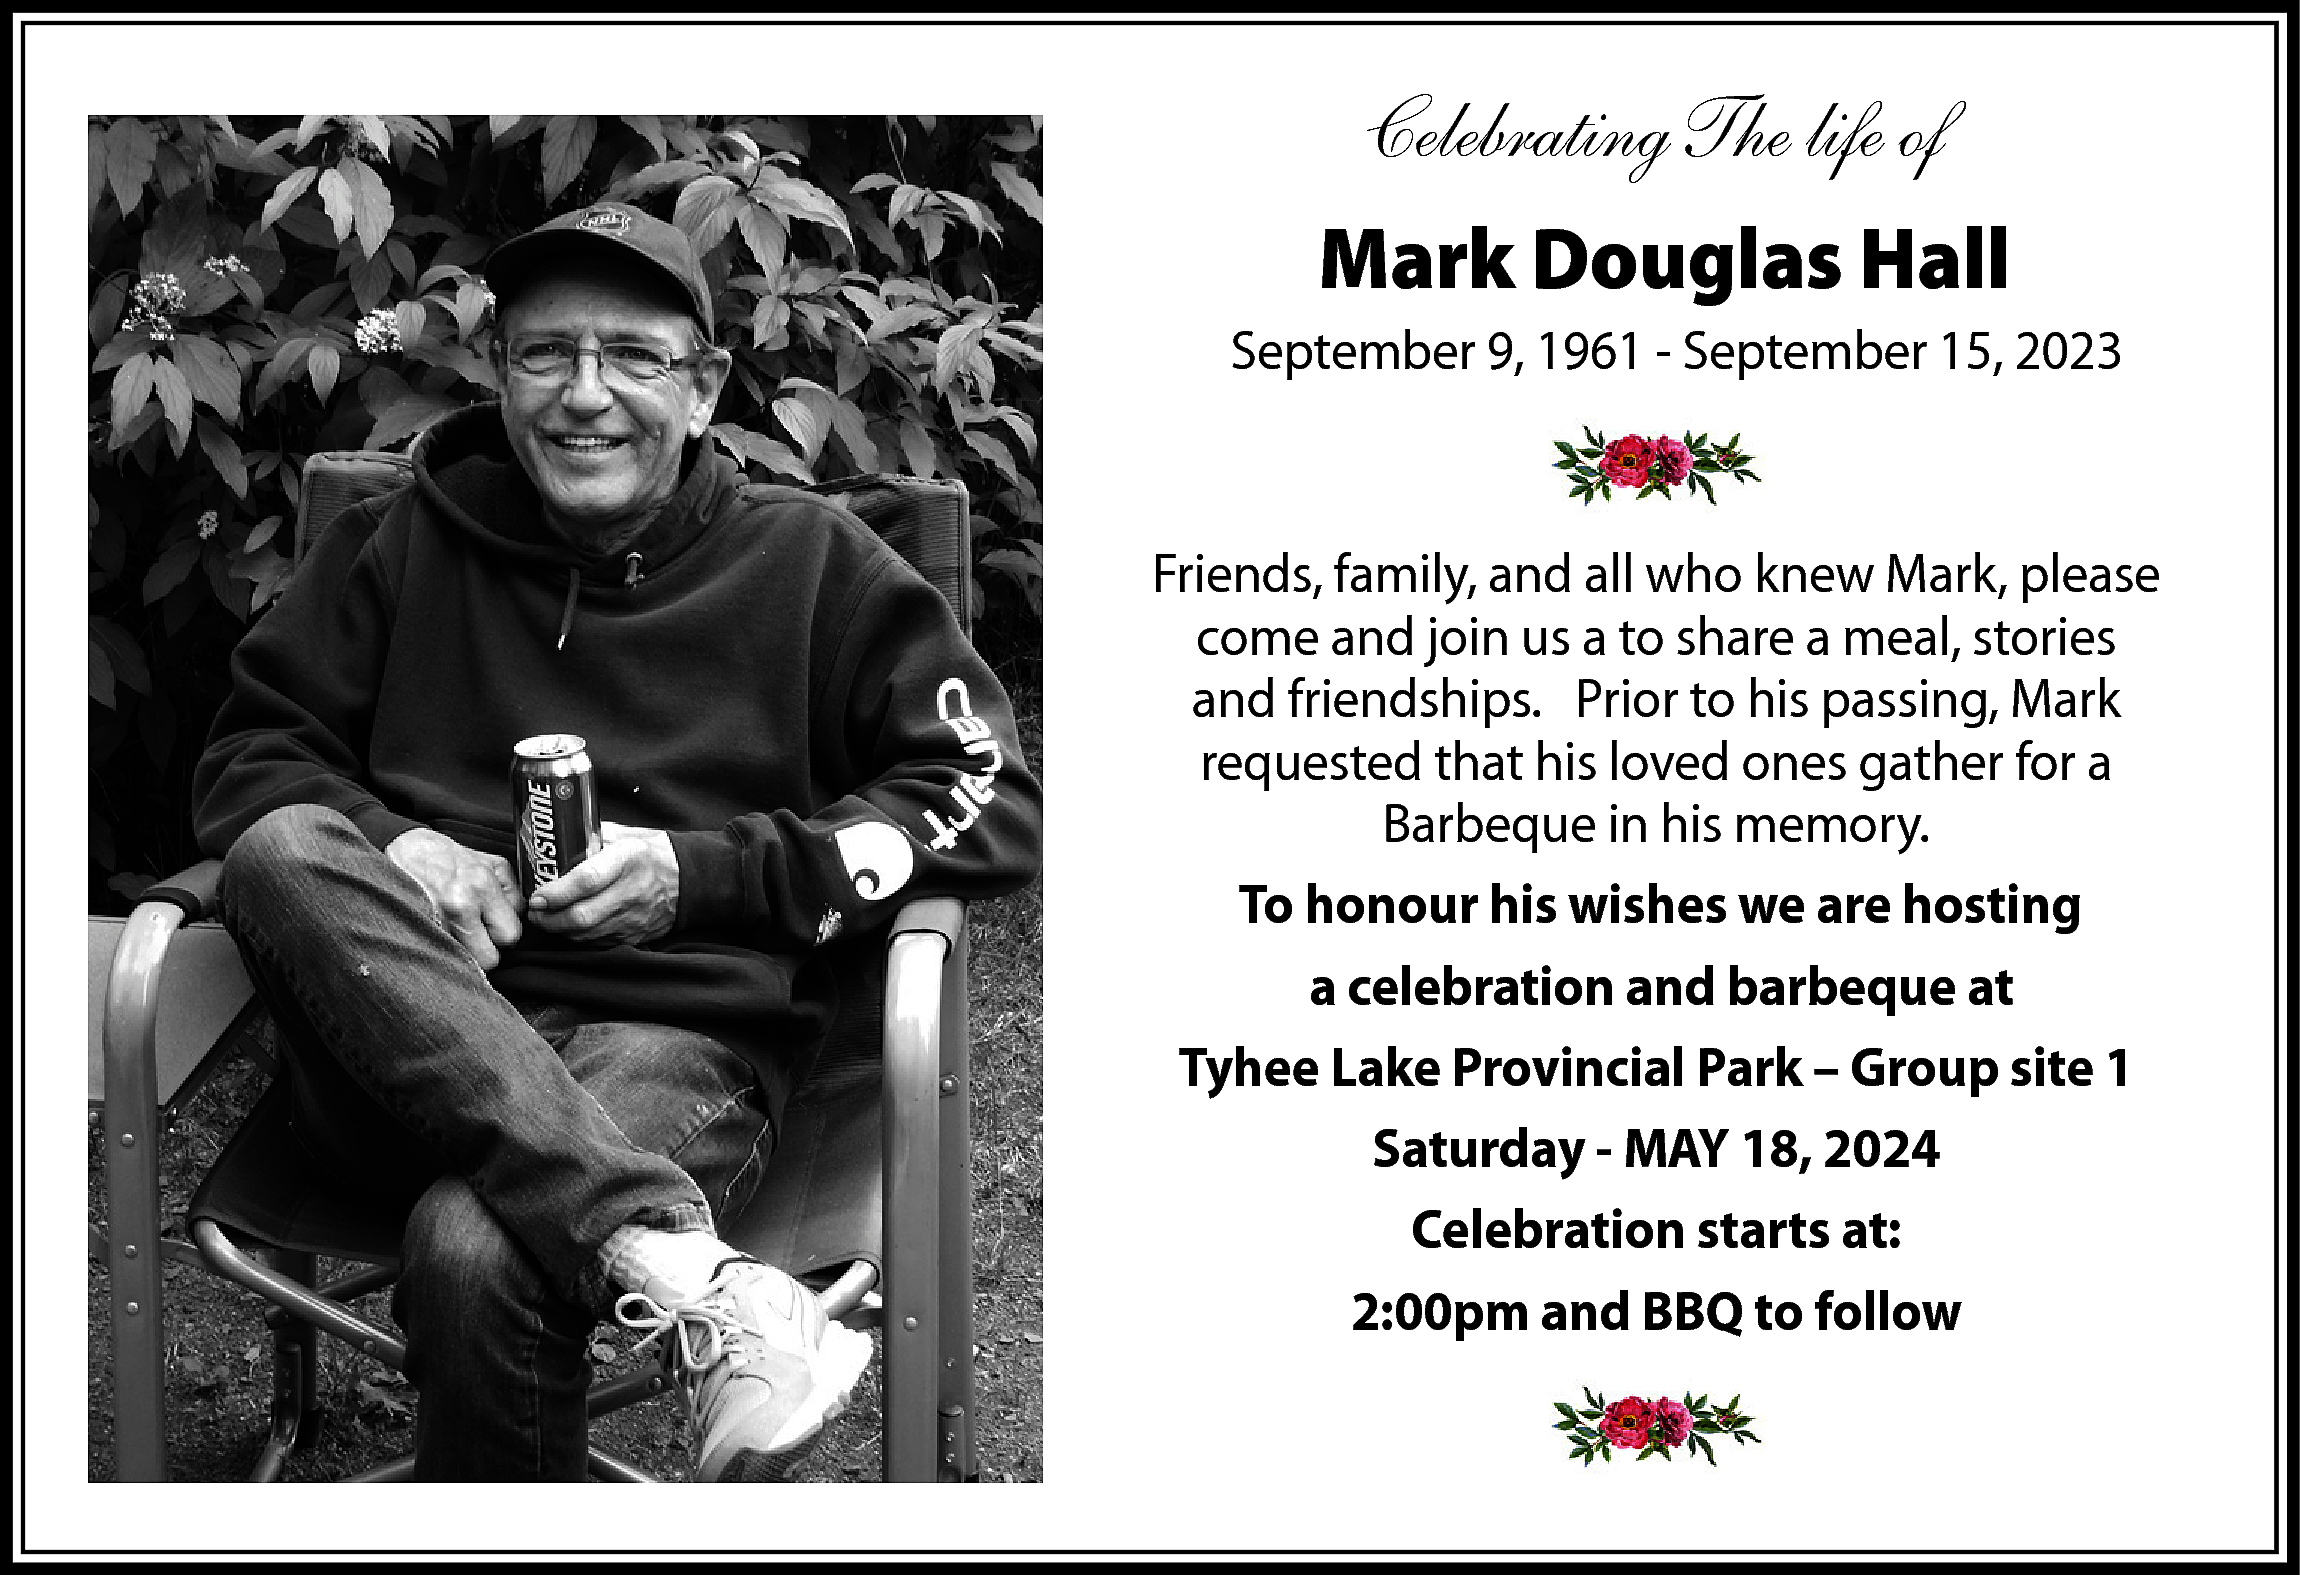 Celebrating The life of <br>Mark  Celebrating The life of  Mark Douglas Hall  September 9, 1961 - September 15, 2023    Friends, family, and all who knew Mark, please  come and join us a to share a meal, stories  and friendships. Prior to his passing, Mark  requested that his loved ones gather for a  Barbeque in his memory.  To honour his wishes we are hosting  a celebration and barbeque at  Tyhee Lake Provincial Park – Group site 1  Saturday - MAY 18, 2024  Celebration starts at:  2:00pm and BBQ to follow    